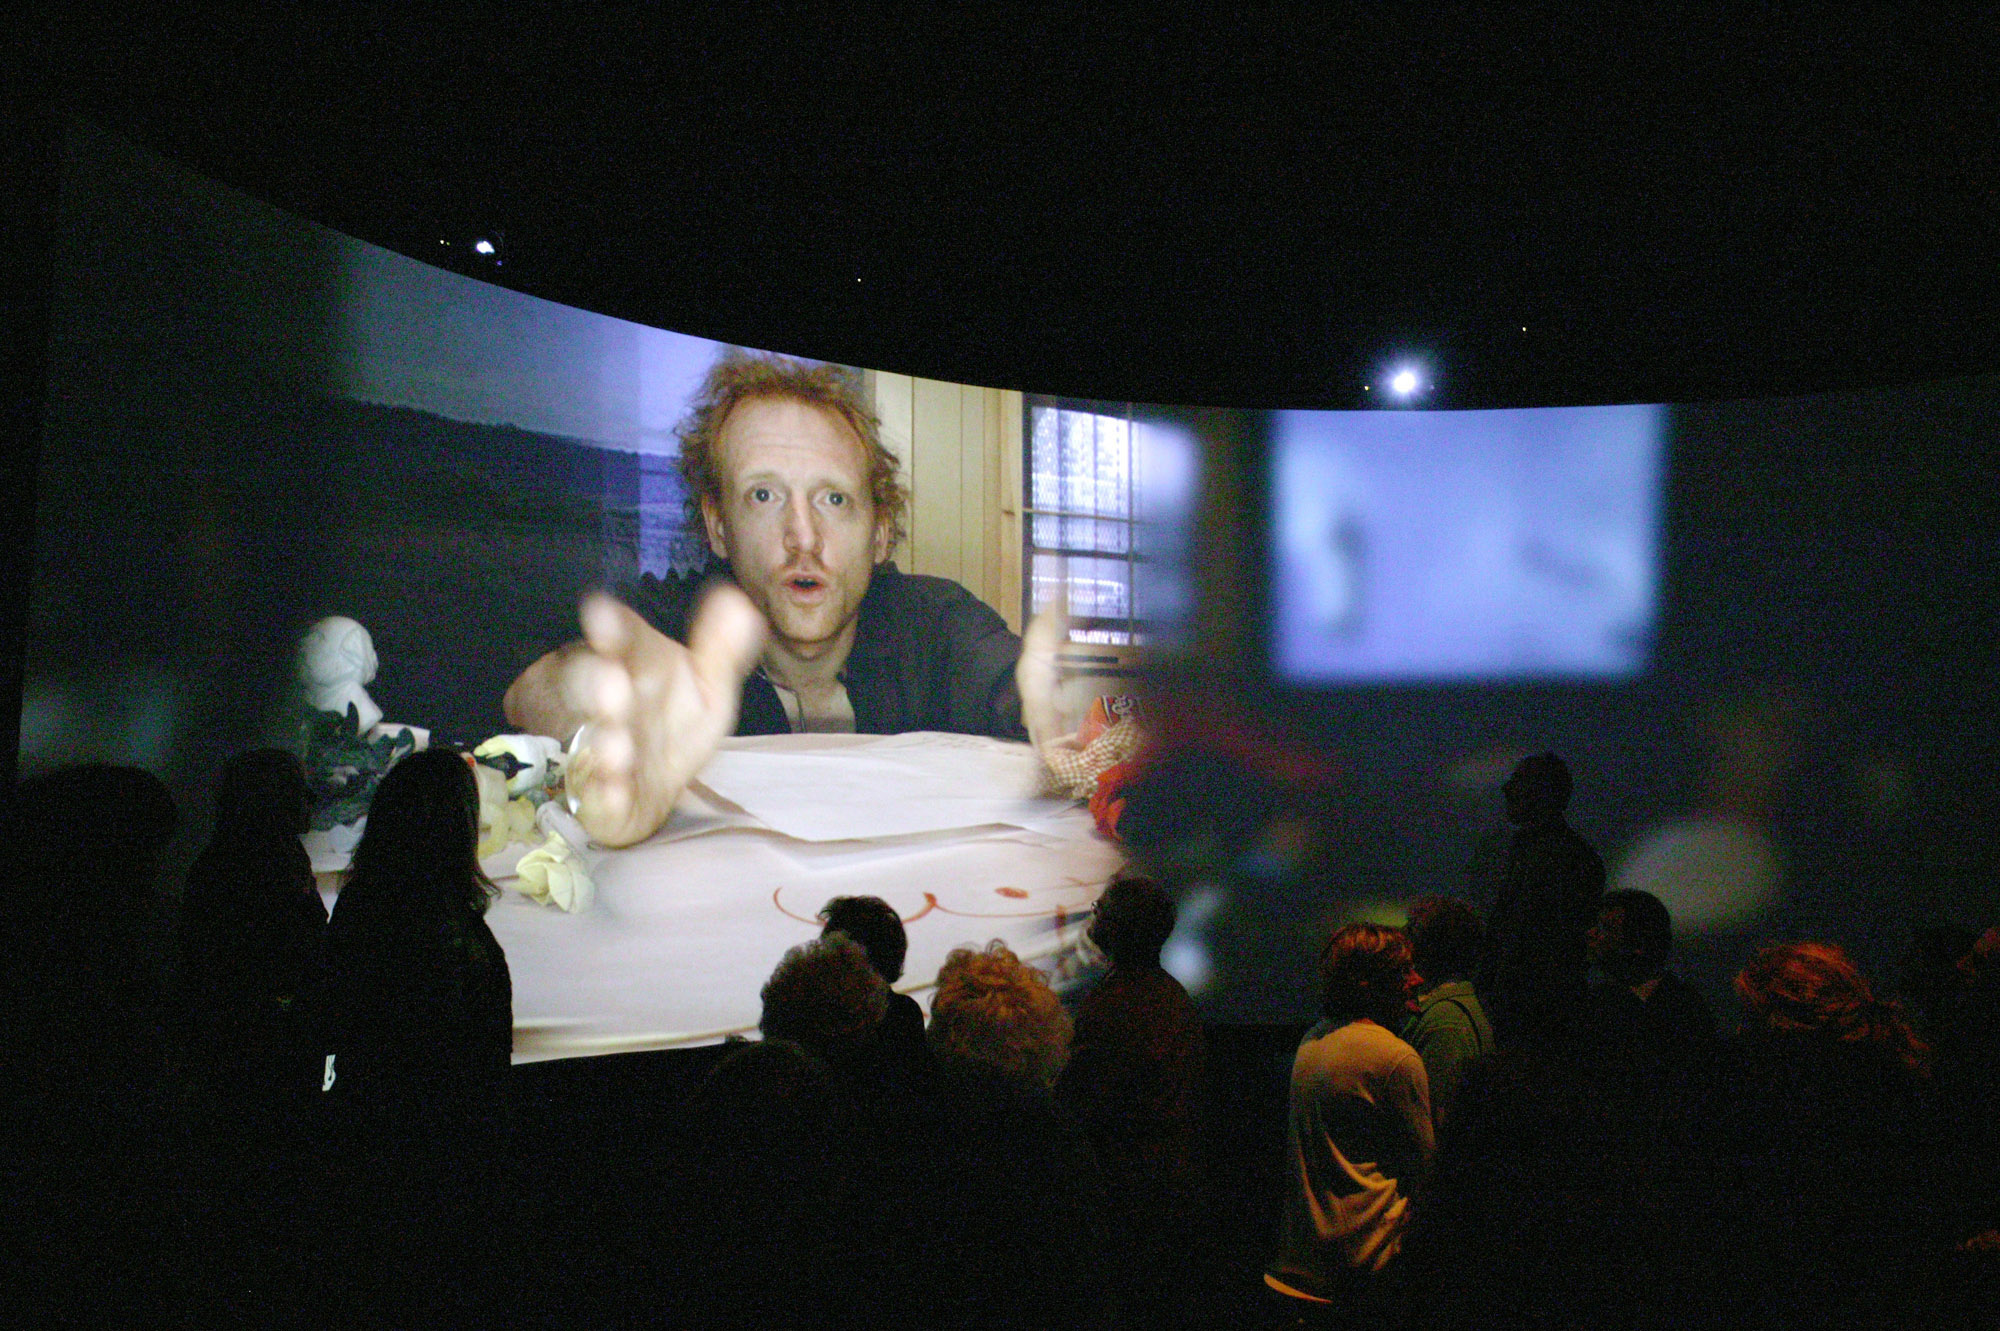 A small crowd milling about in front of a panoramic screen showing an image of a man with red hair reaching. 